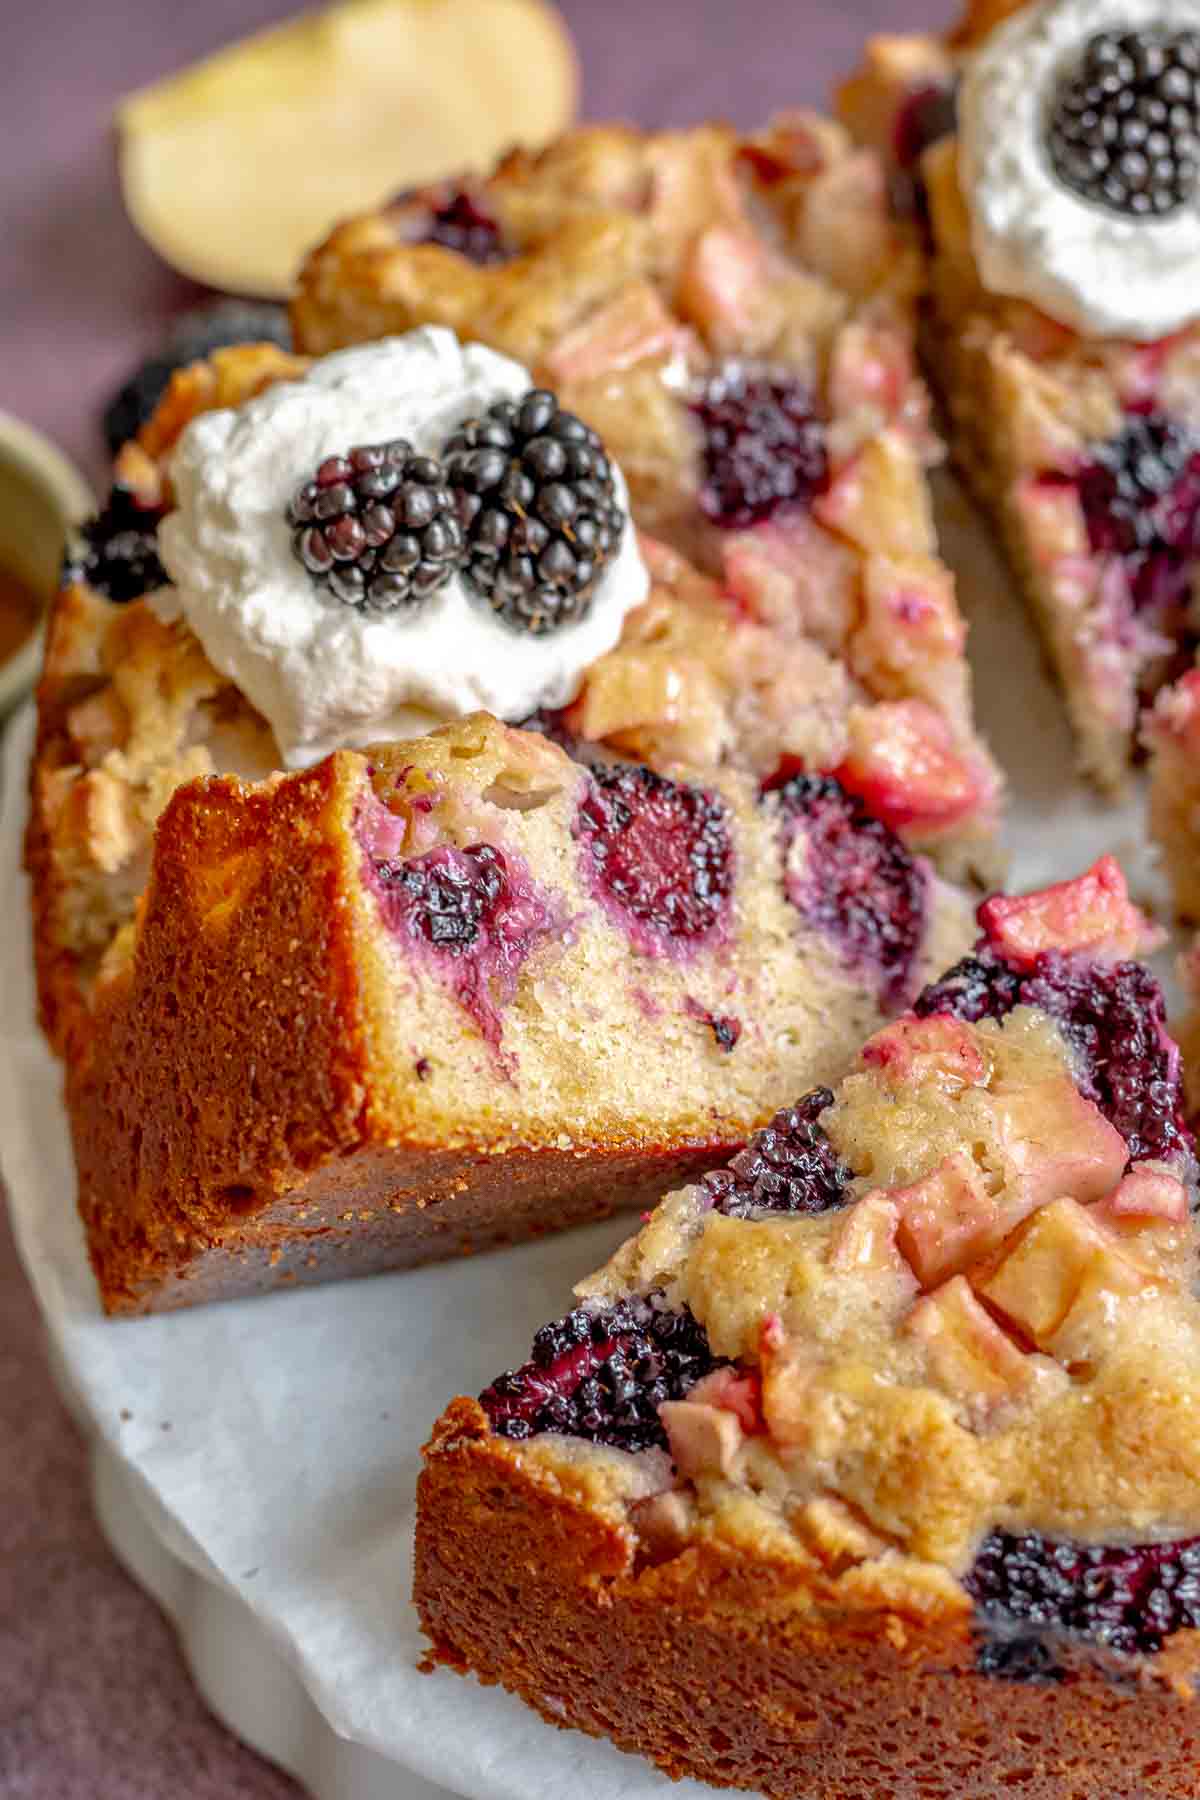 Sliced apple blackberry cake on a platter with one piece laying on its side.